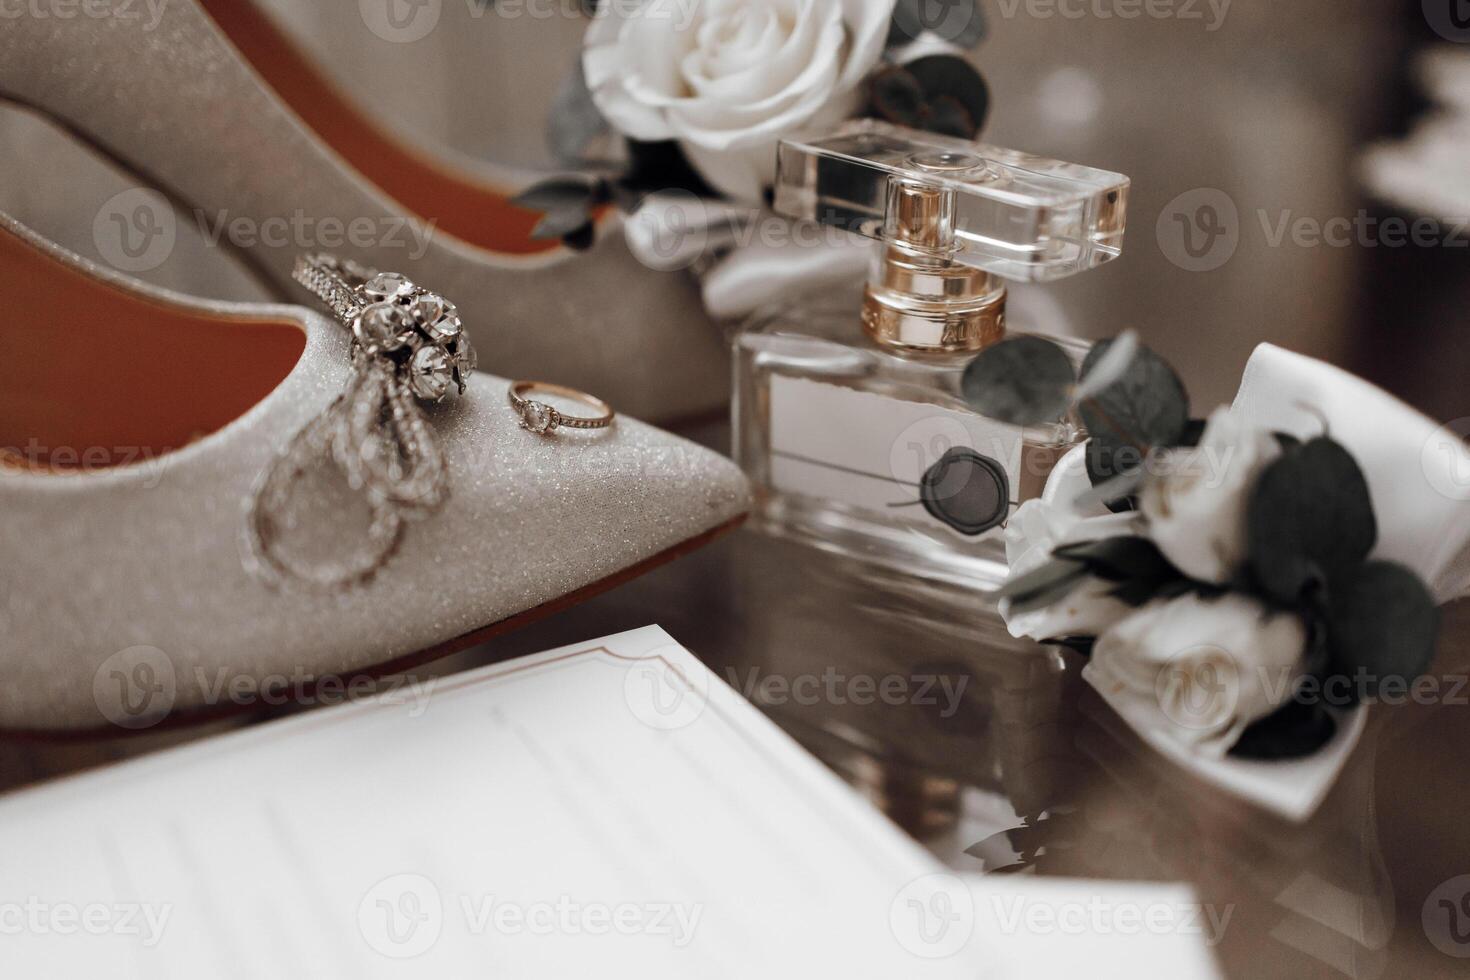 The bride's wedding ring is on the shoes, Perfume. Wedding details photo